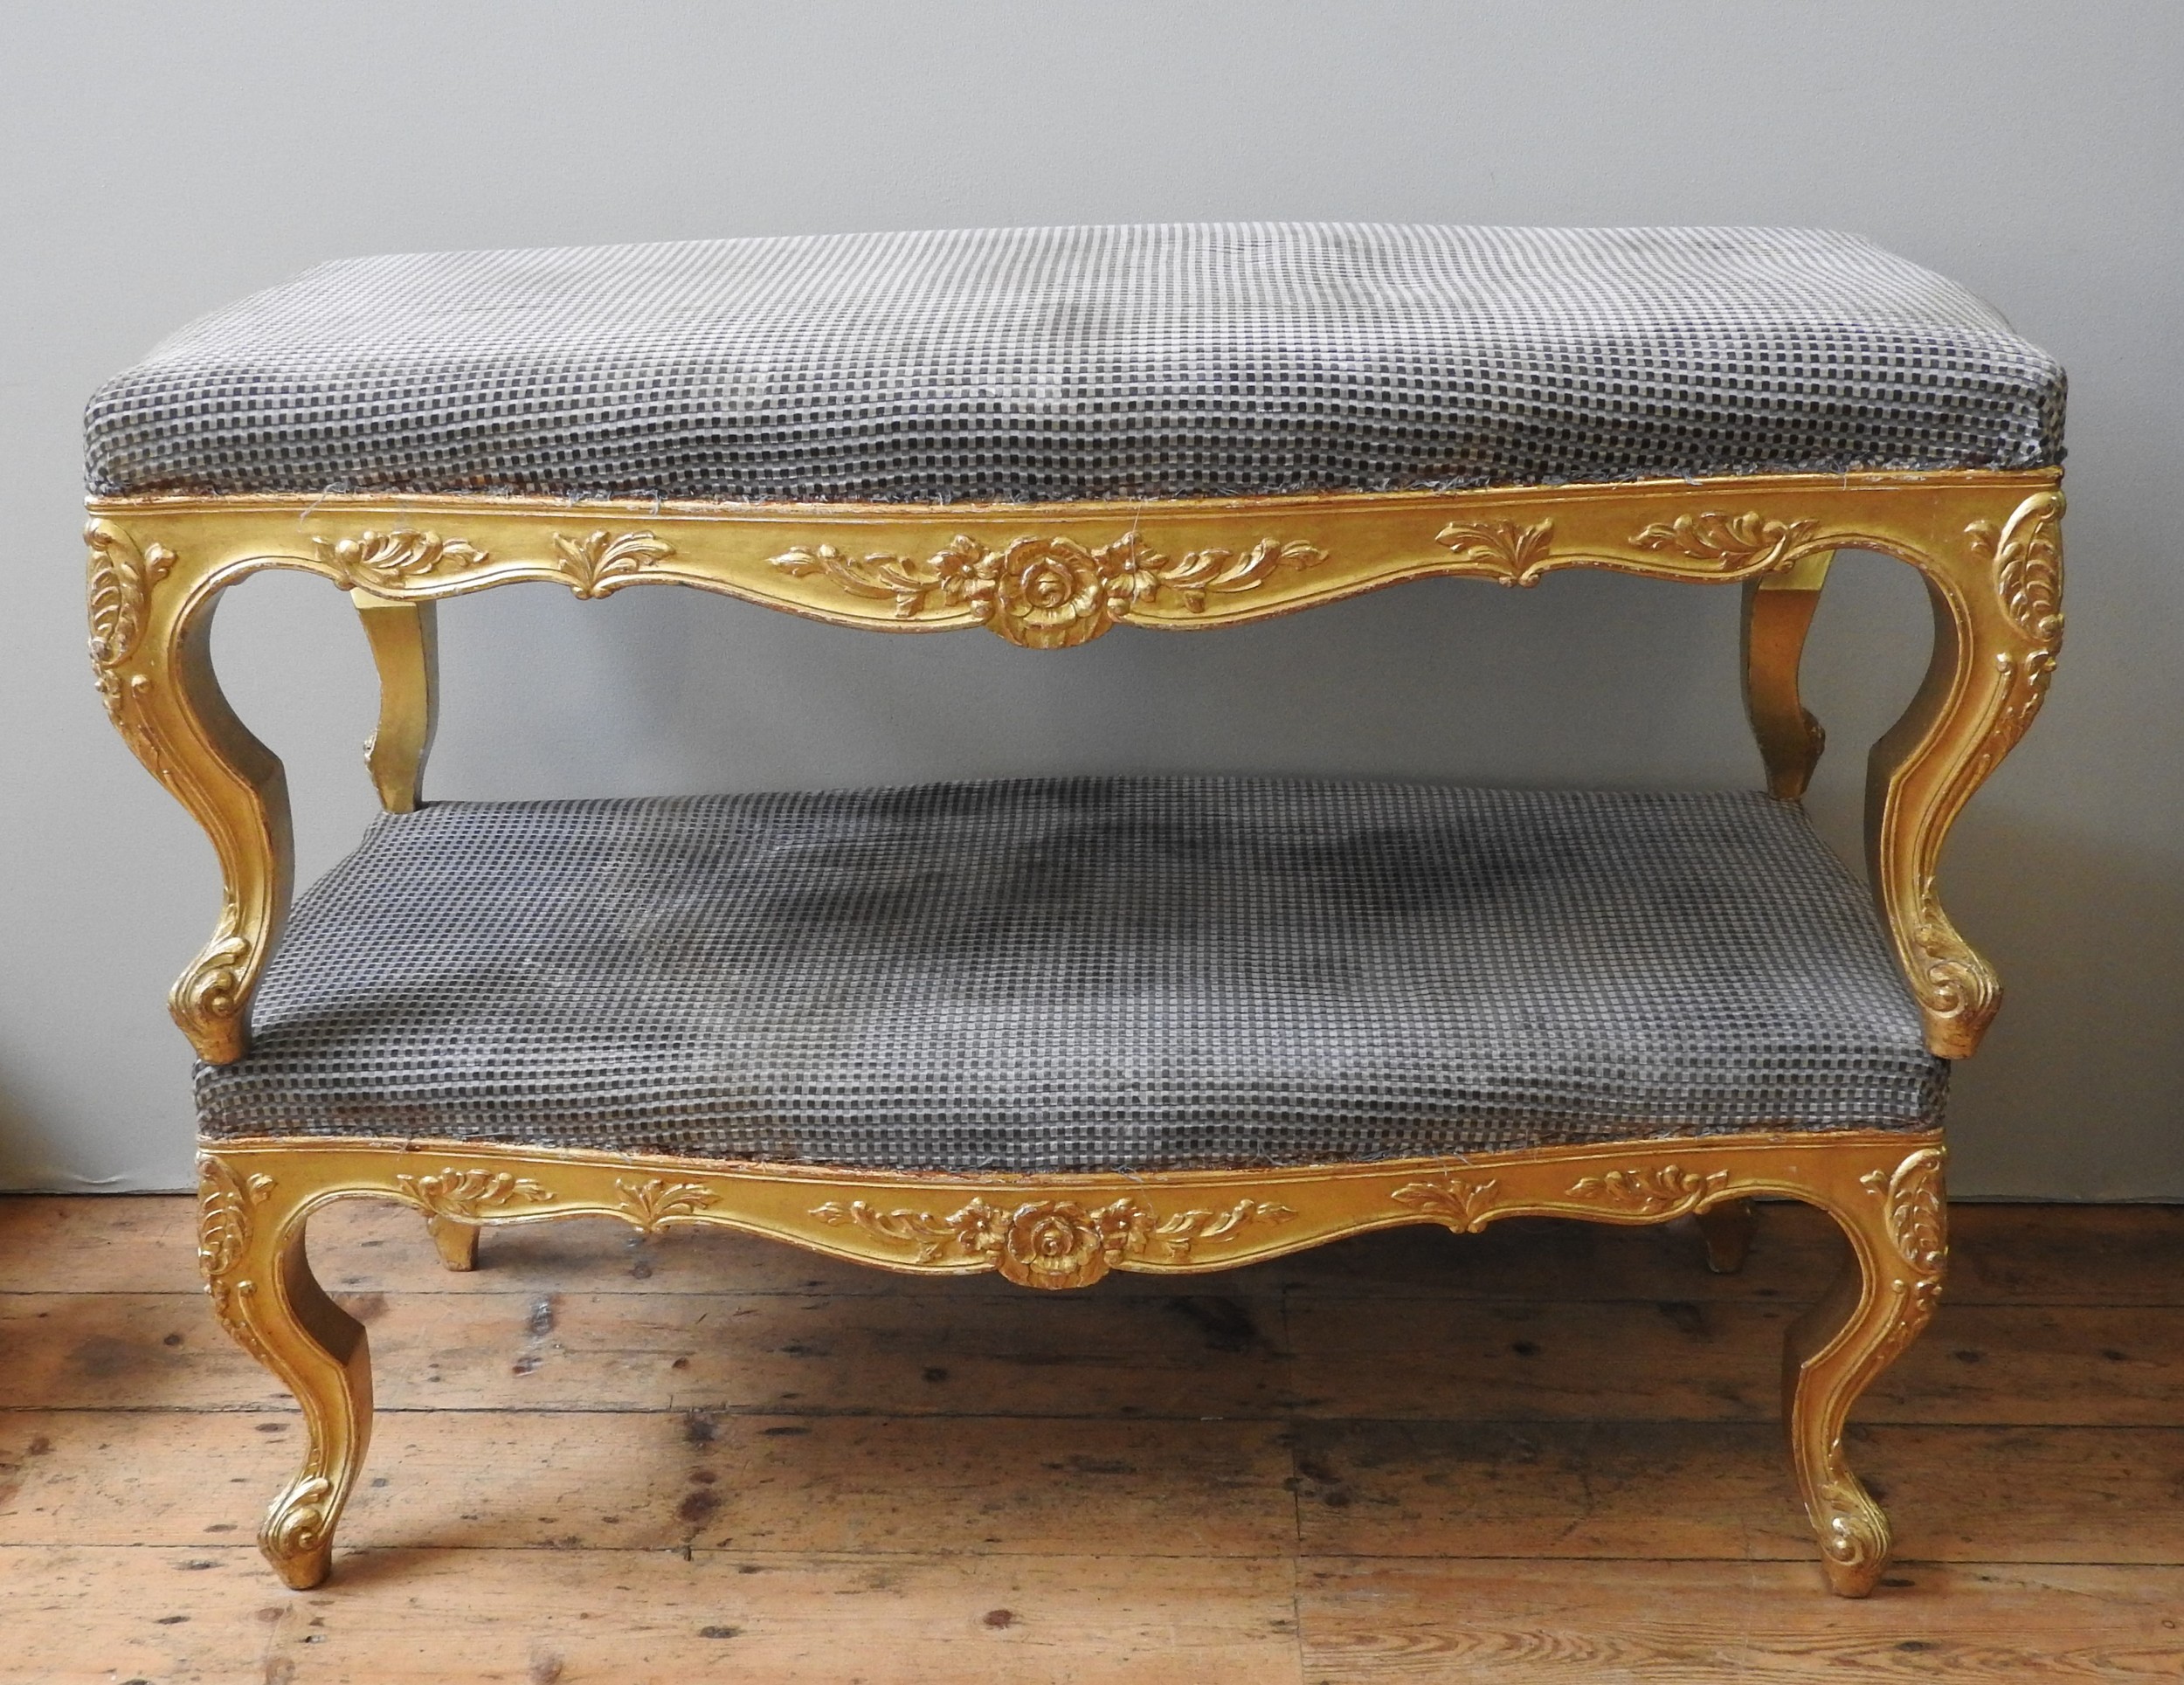 A PAIR OF LARGE REGENCY STYLE GILT FRAMED STOOLS, EARLY 20TH CENTURY, serpentine form, large